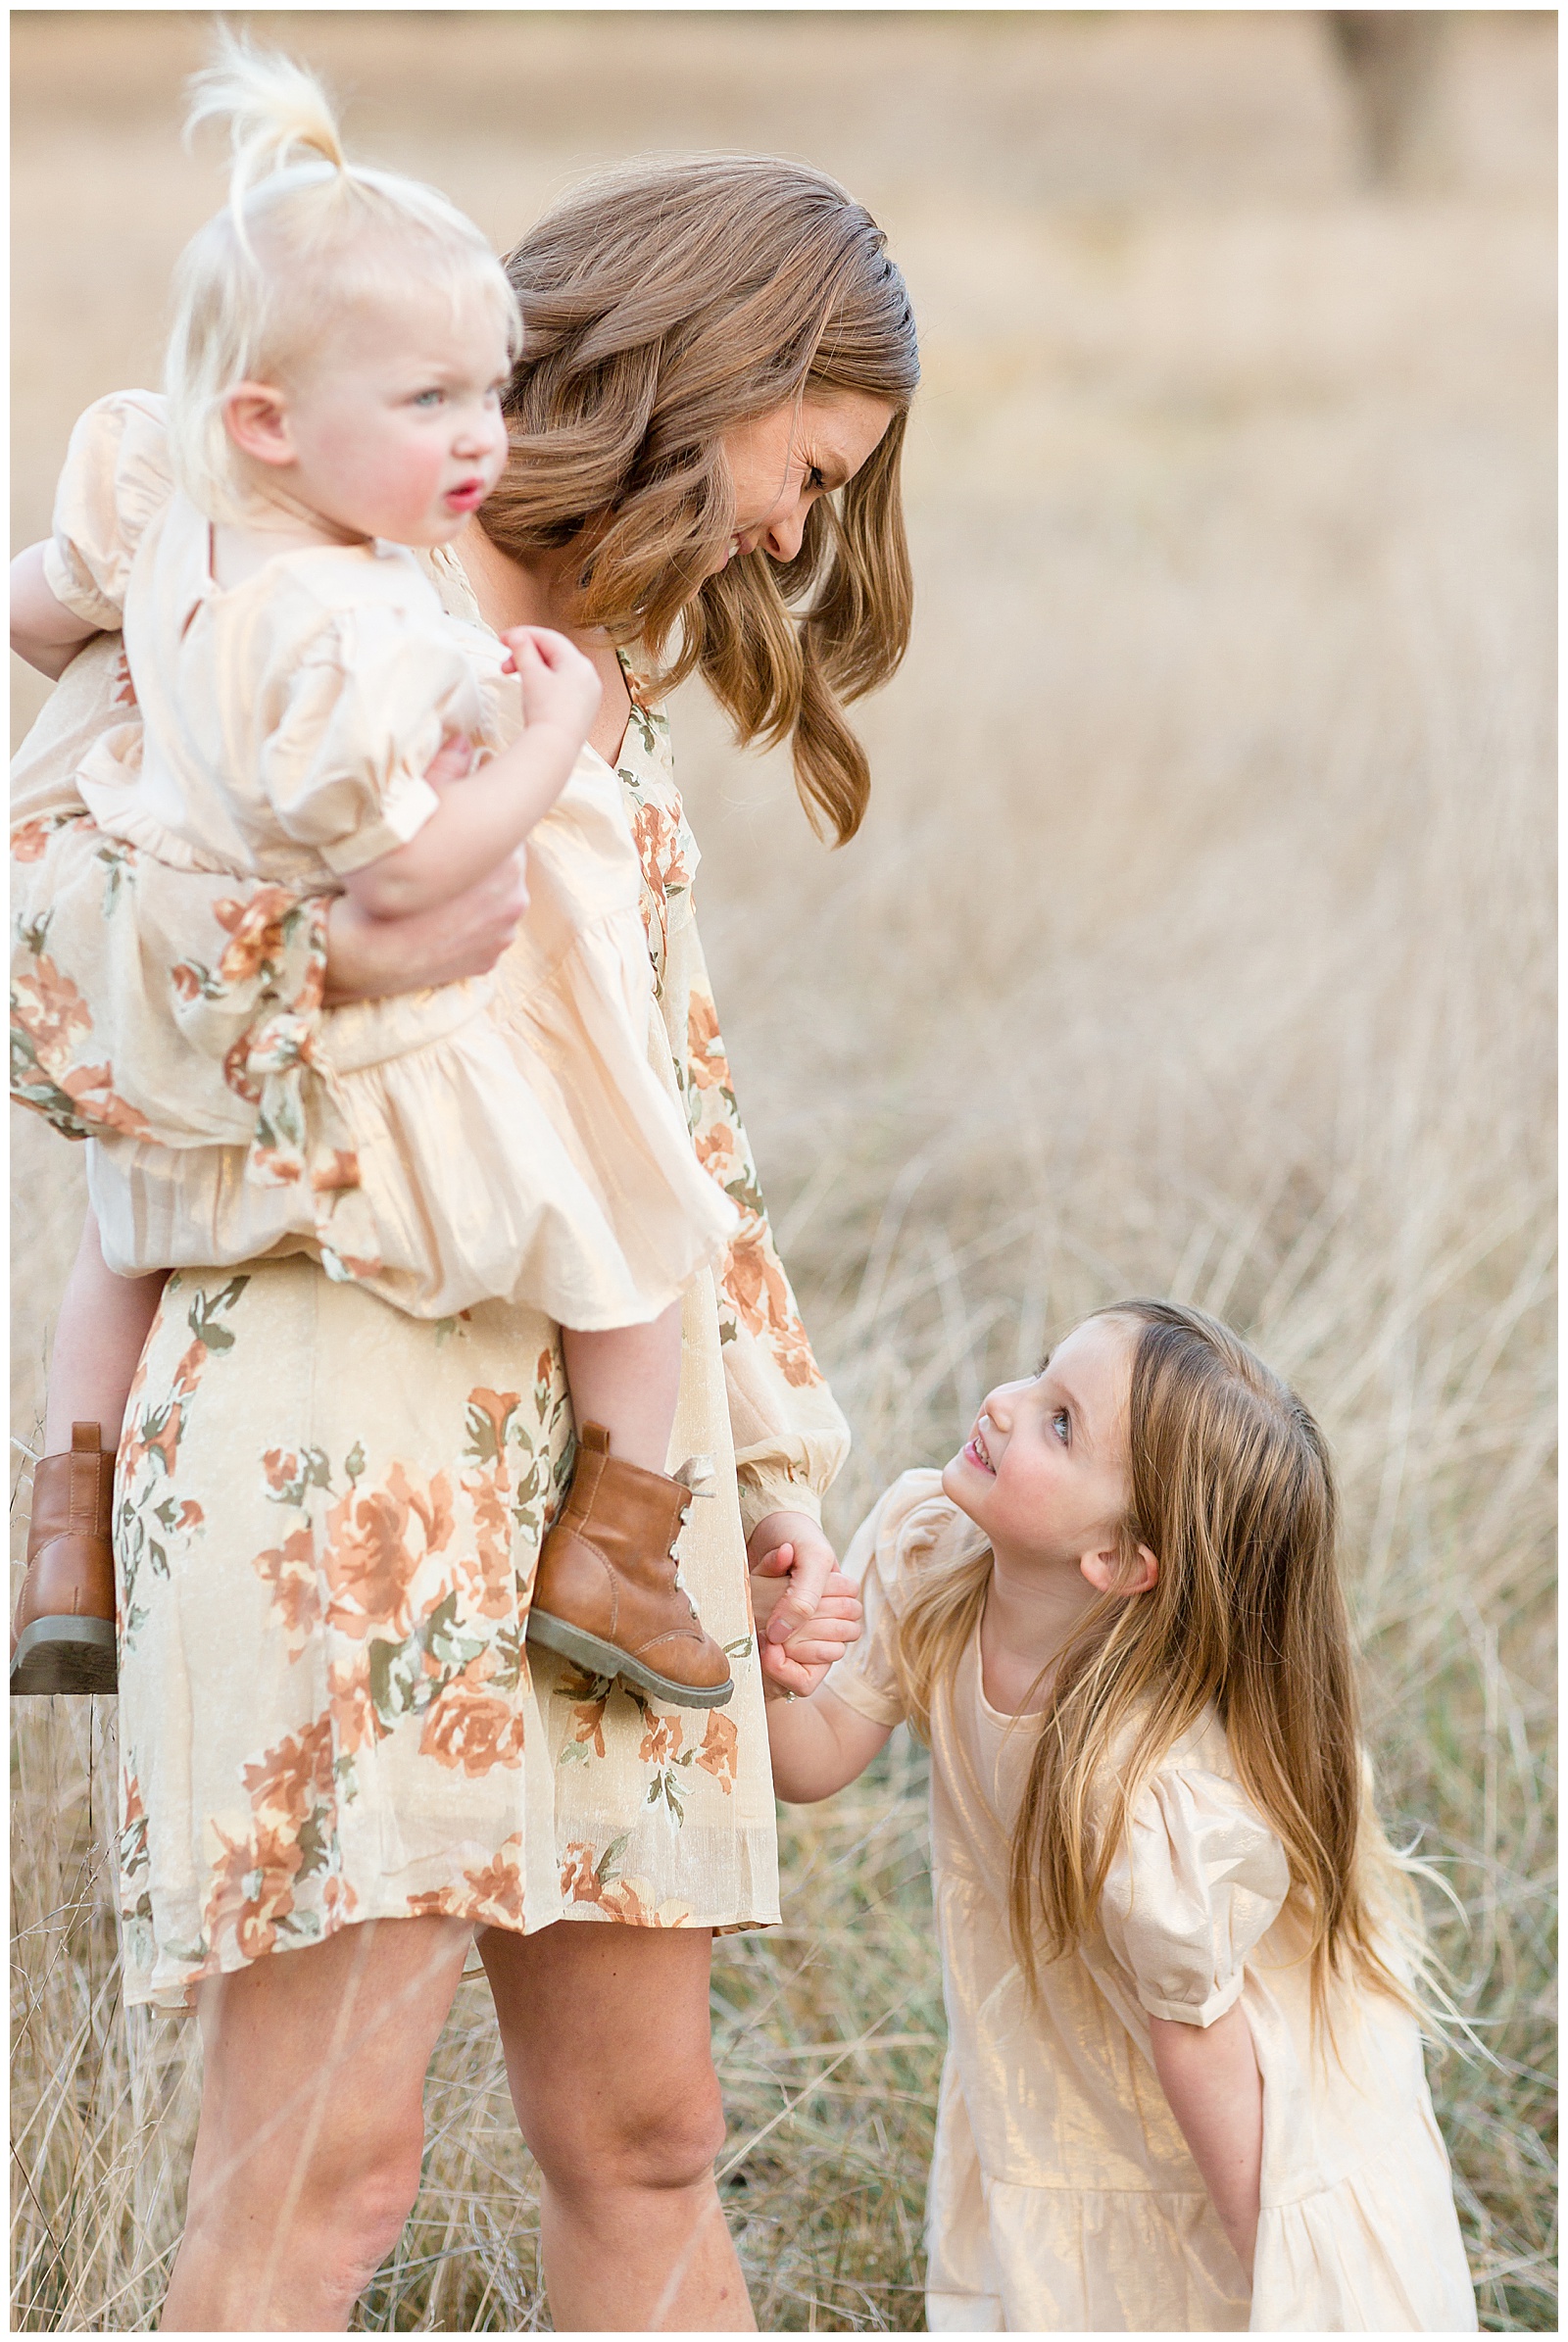 Mom is wearing a cream colored, bohemian floral v-neck dress as she holds her toddler daughter and looks down at her oldest daughter and holds her hand as they look and smile at each other.